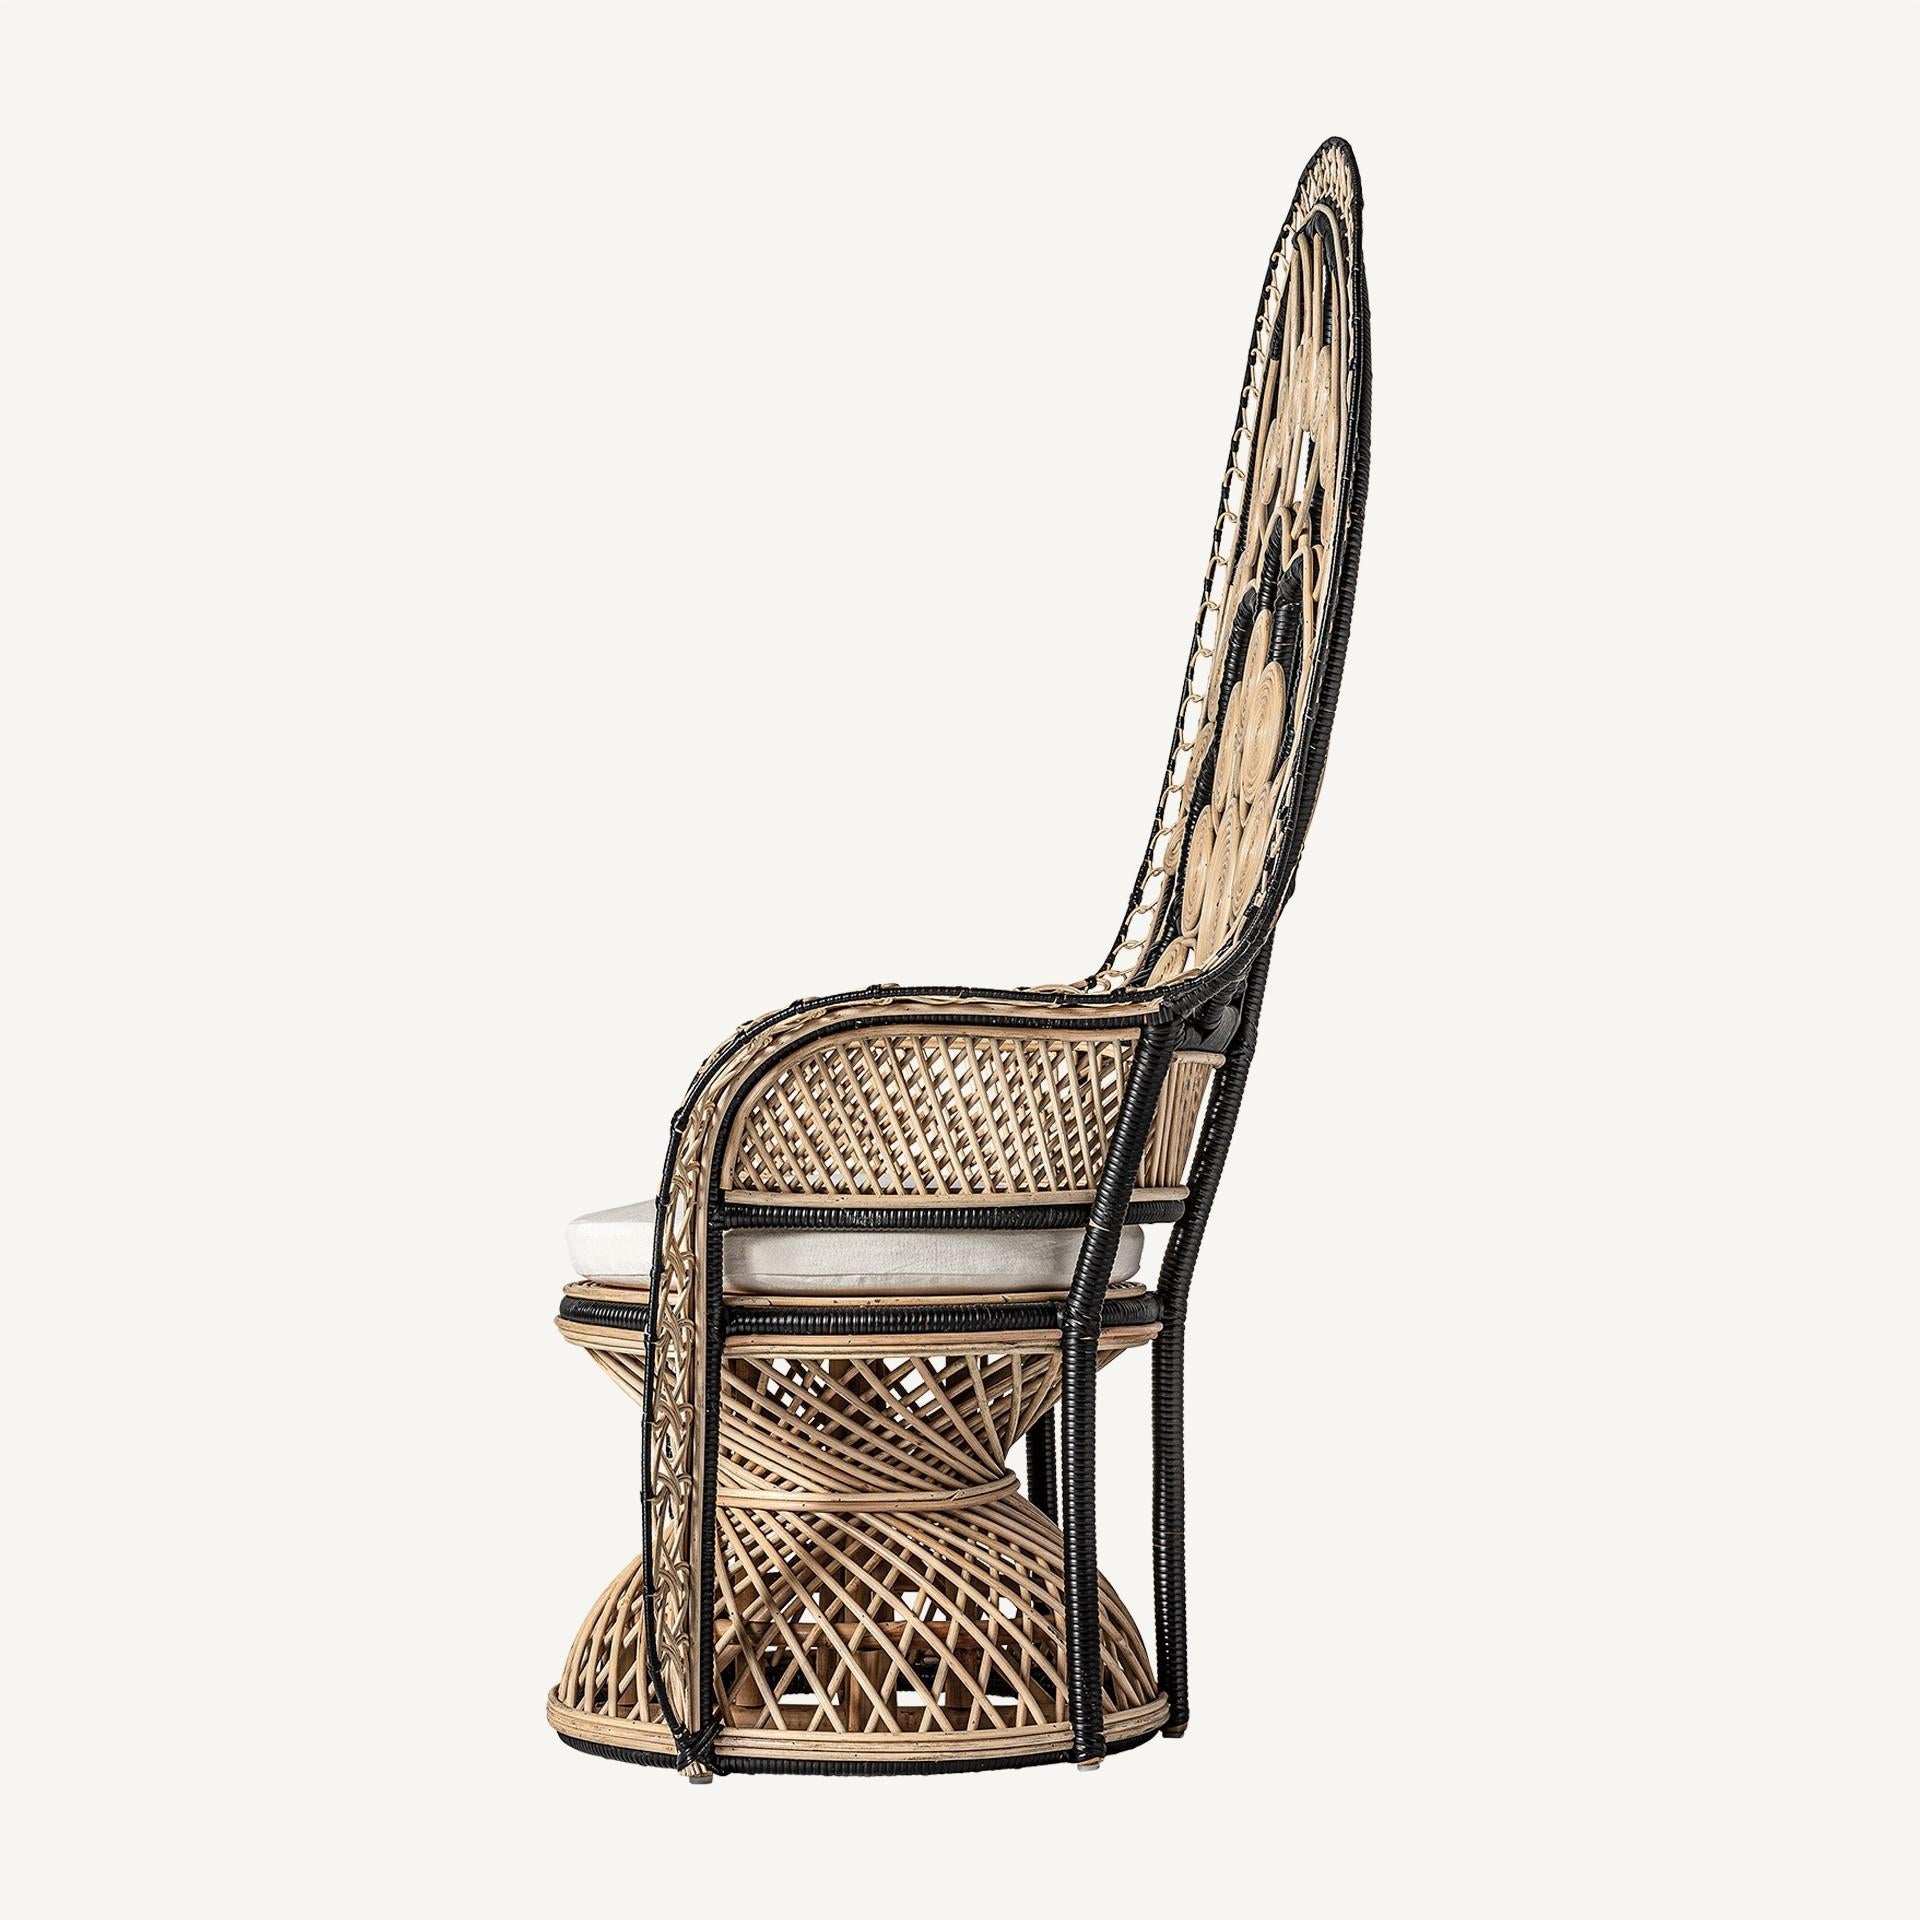 Contemporary French 1970s Design Style Handcrafted Rattan Wicker Peacock Emmanuelle Armchair For Sale